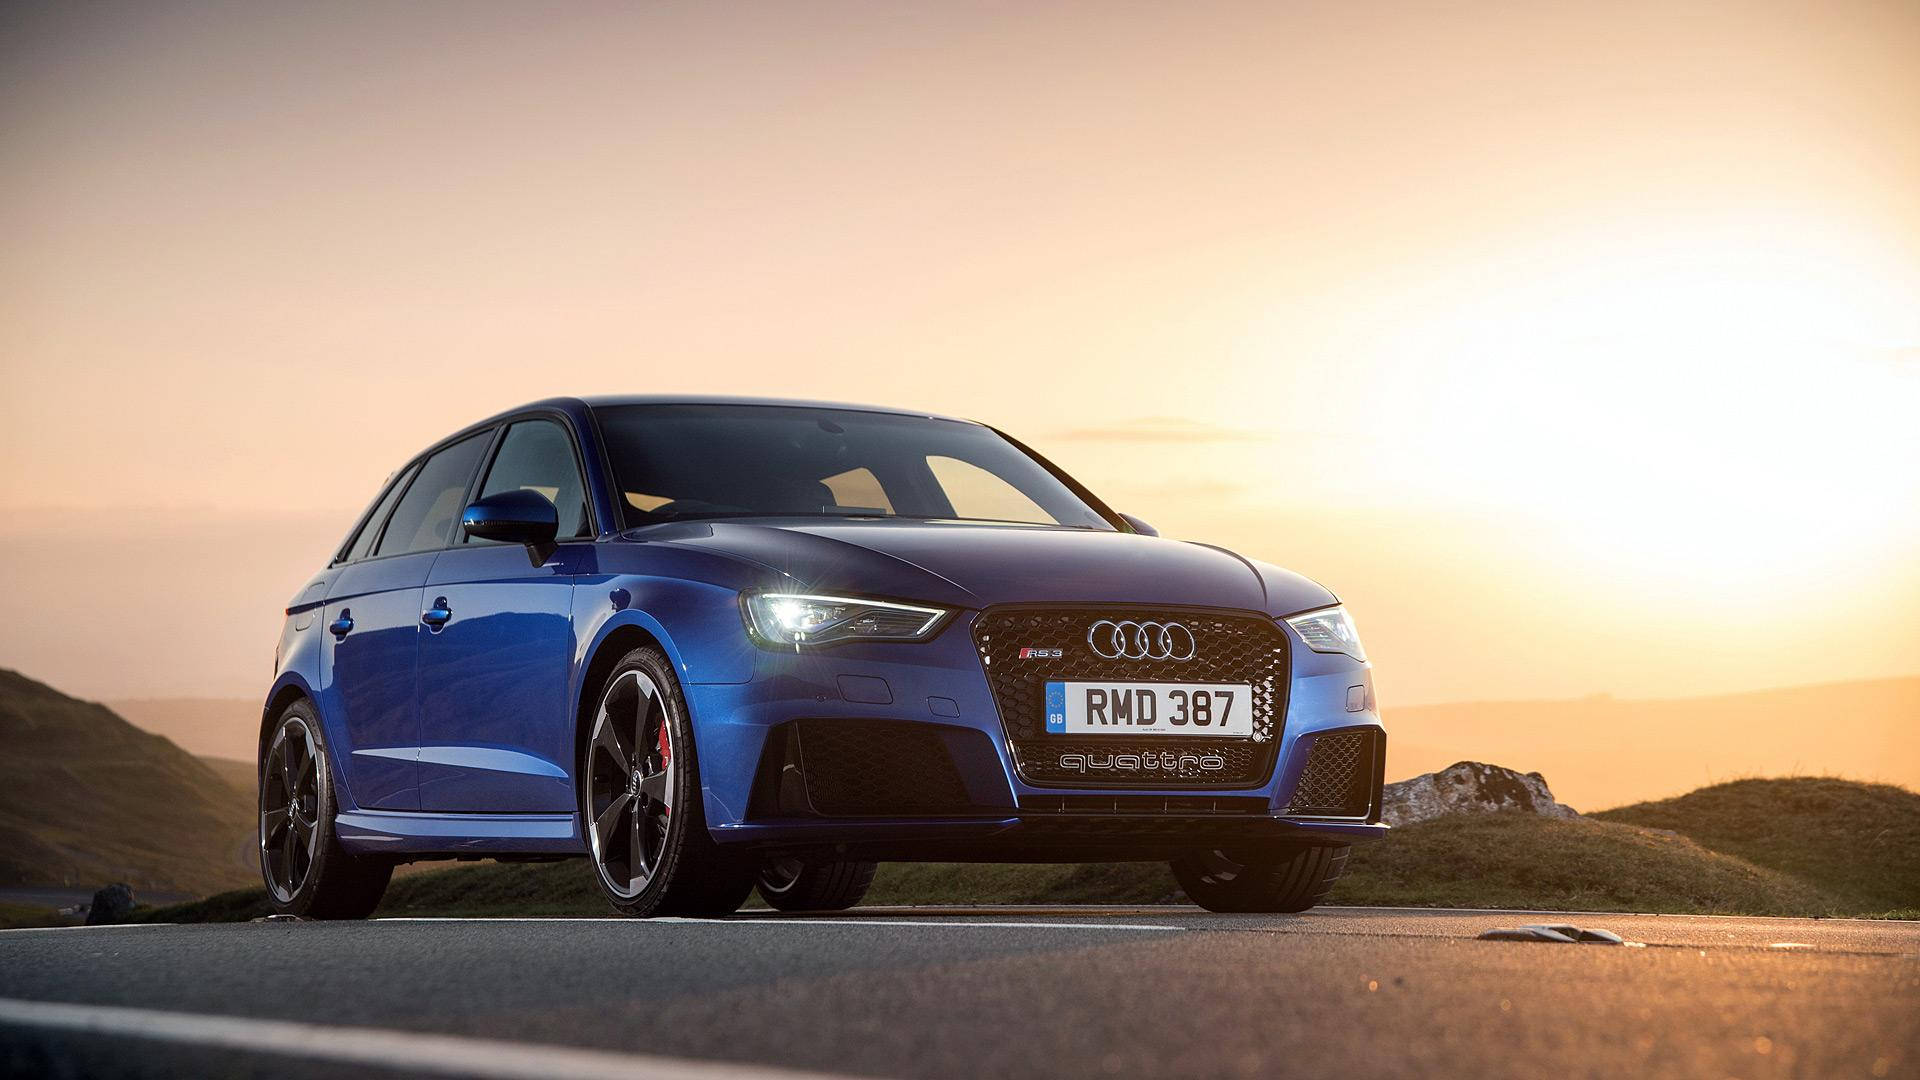 2020 Audi Rs 3 Background